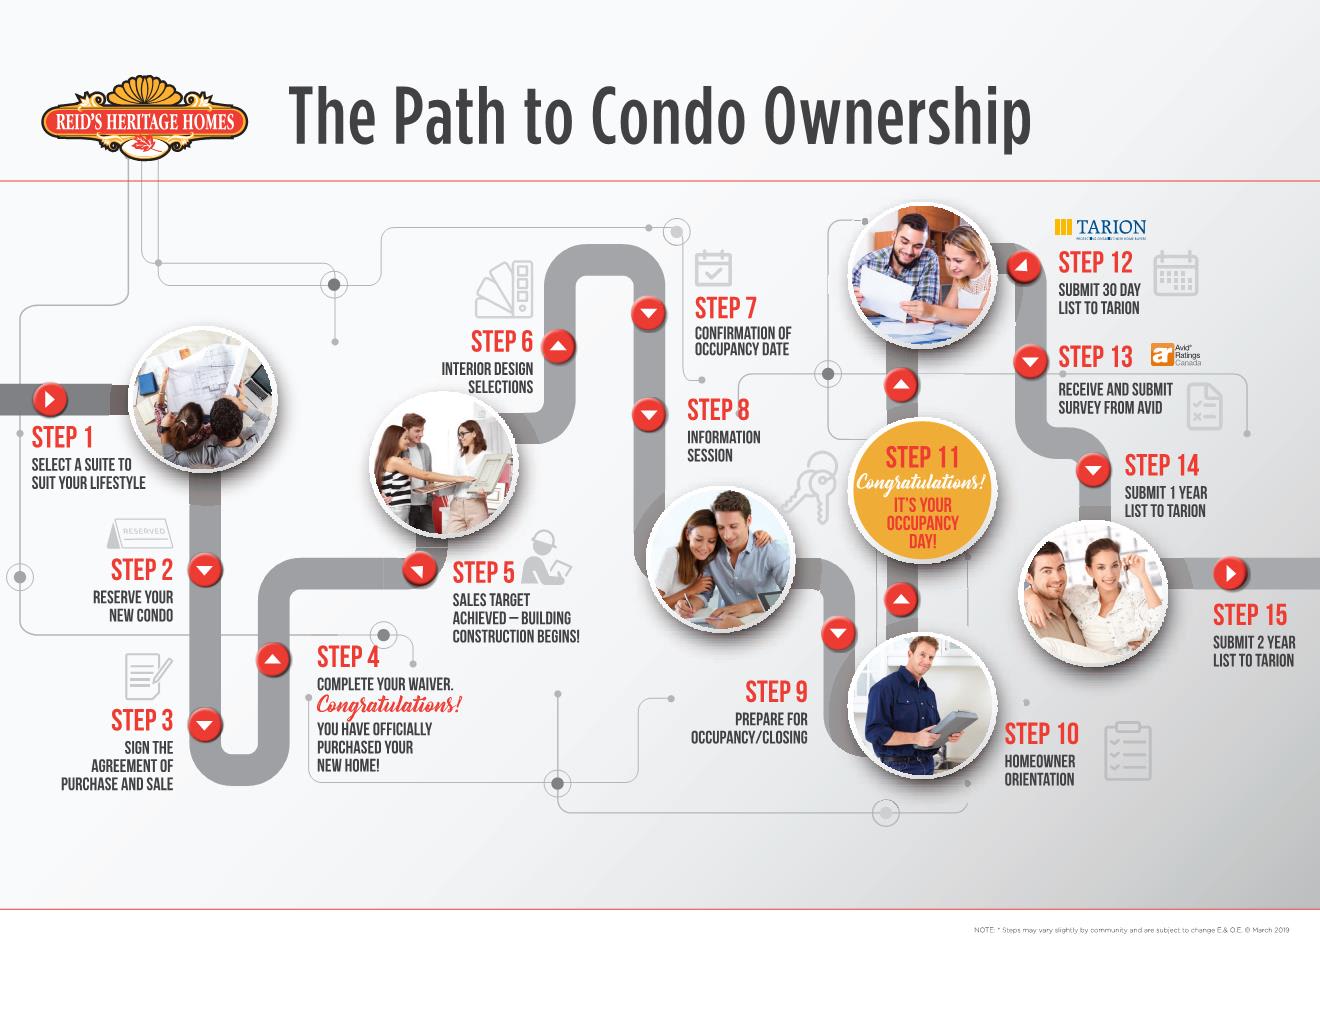 The Path to Condo Ownership